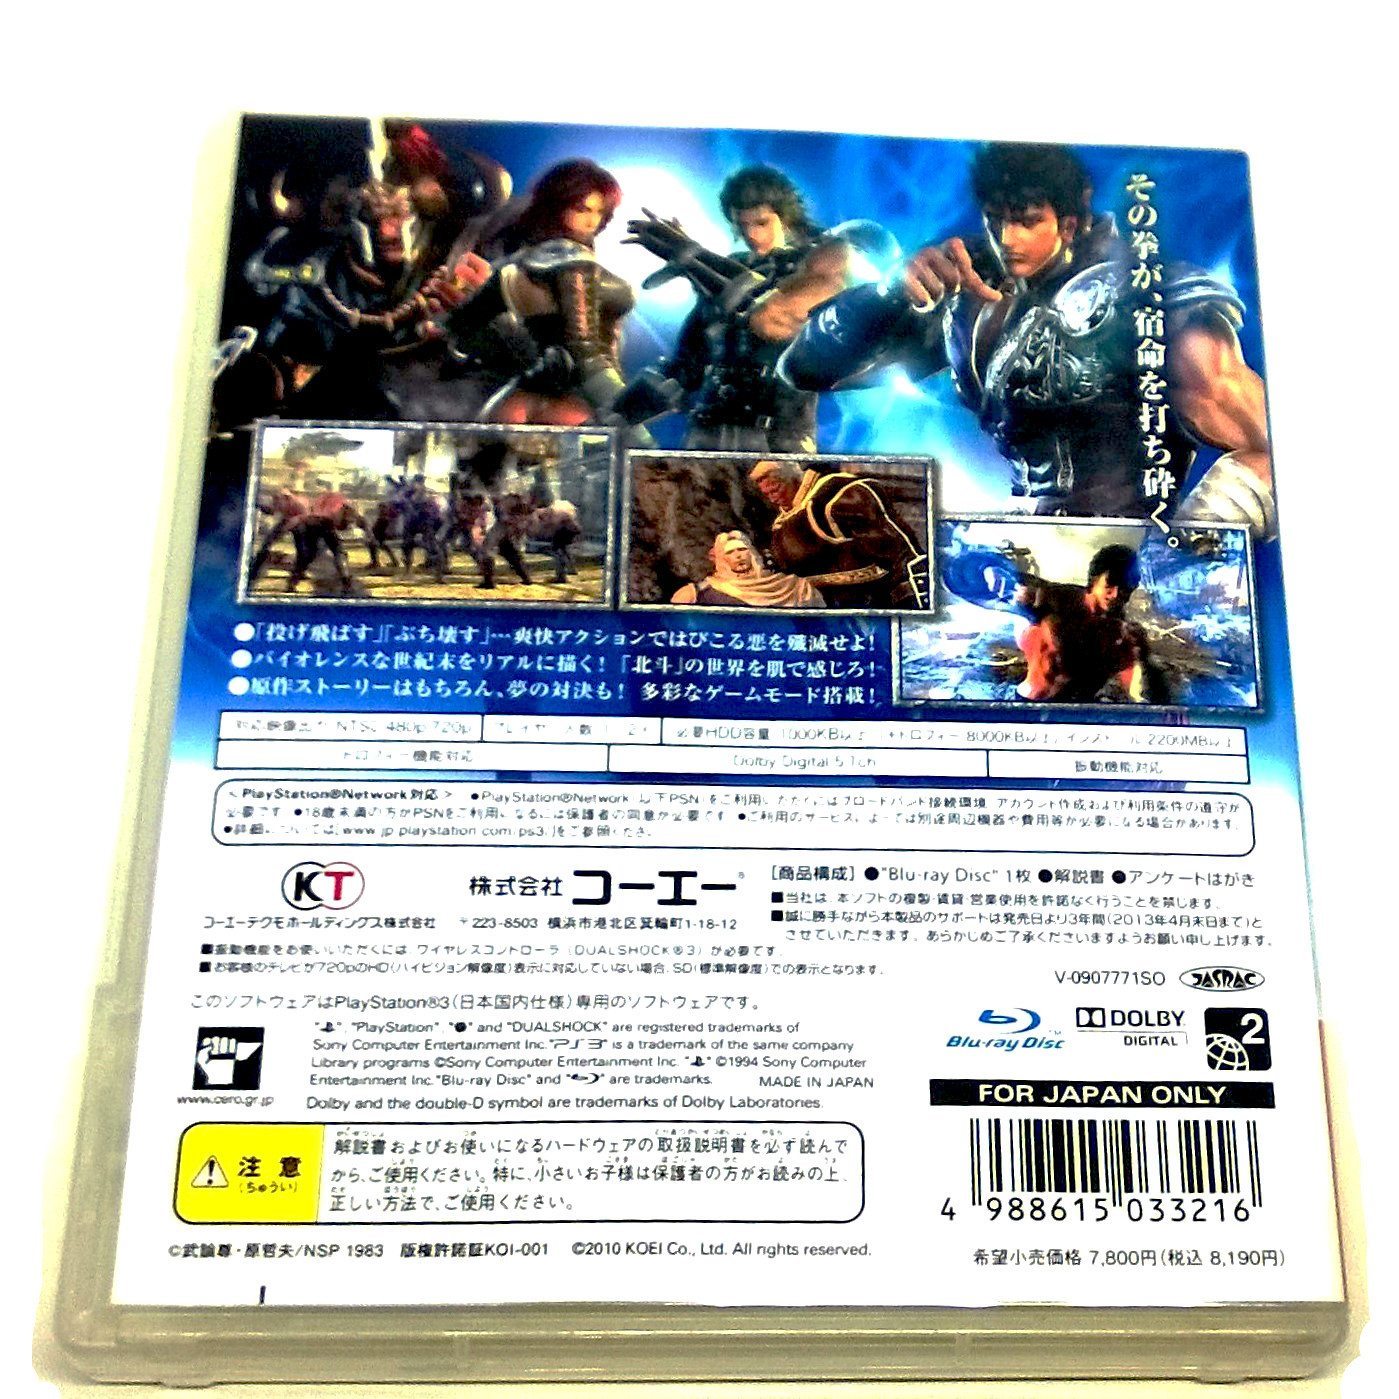 Hokuto Musou for PlayStation 3 (import) - Back of case